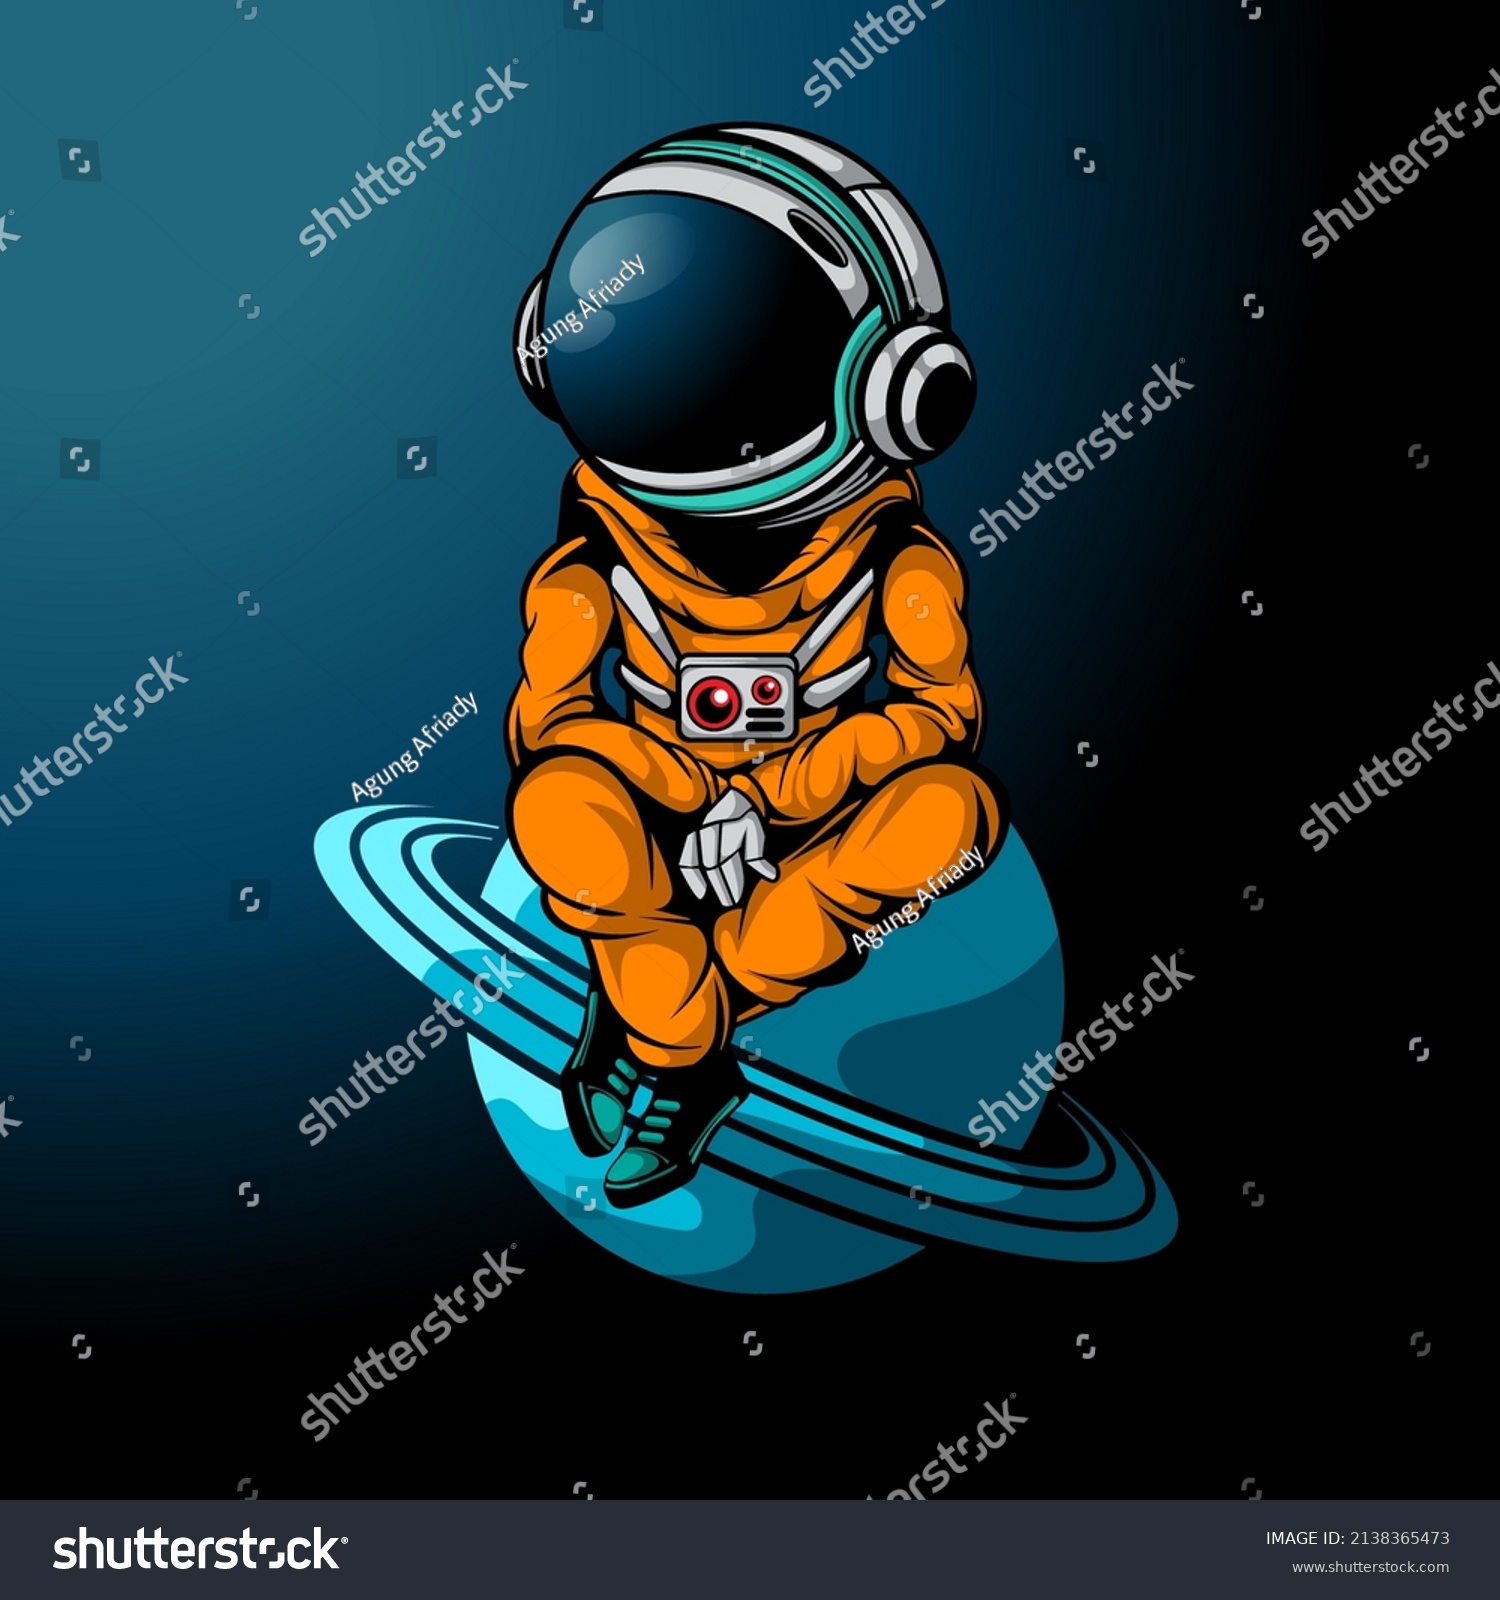 SVG of THE ASTRONAUT RELAX IN THE SPACE svg